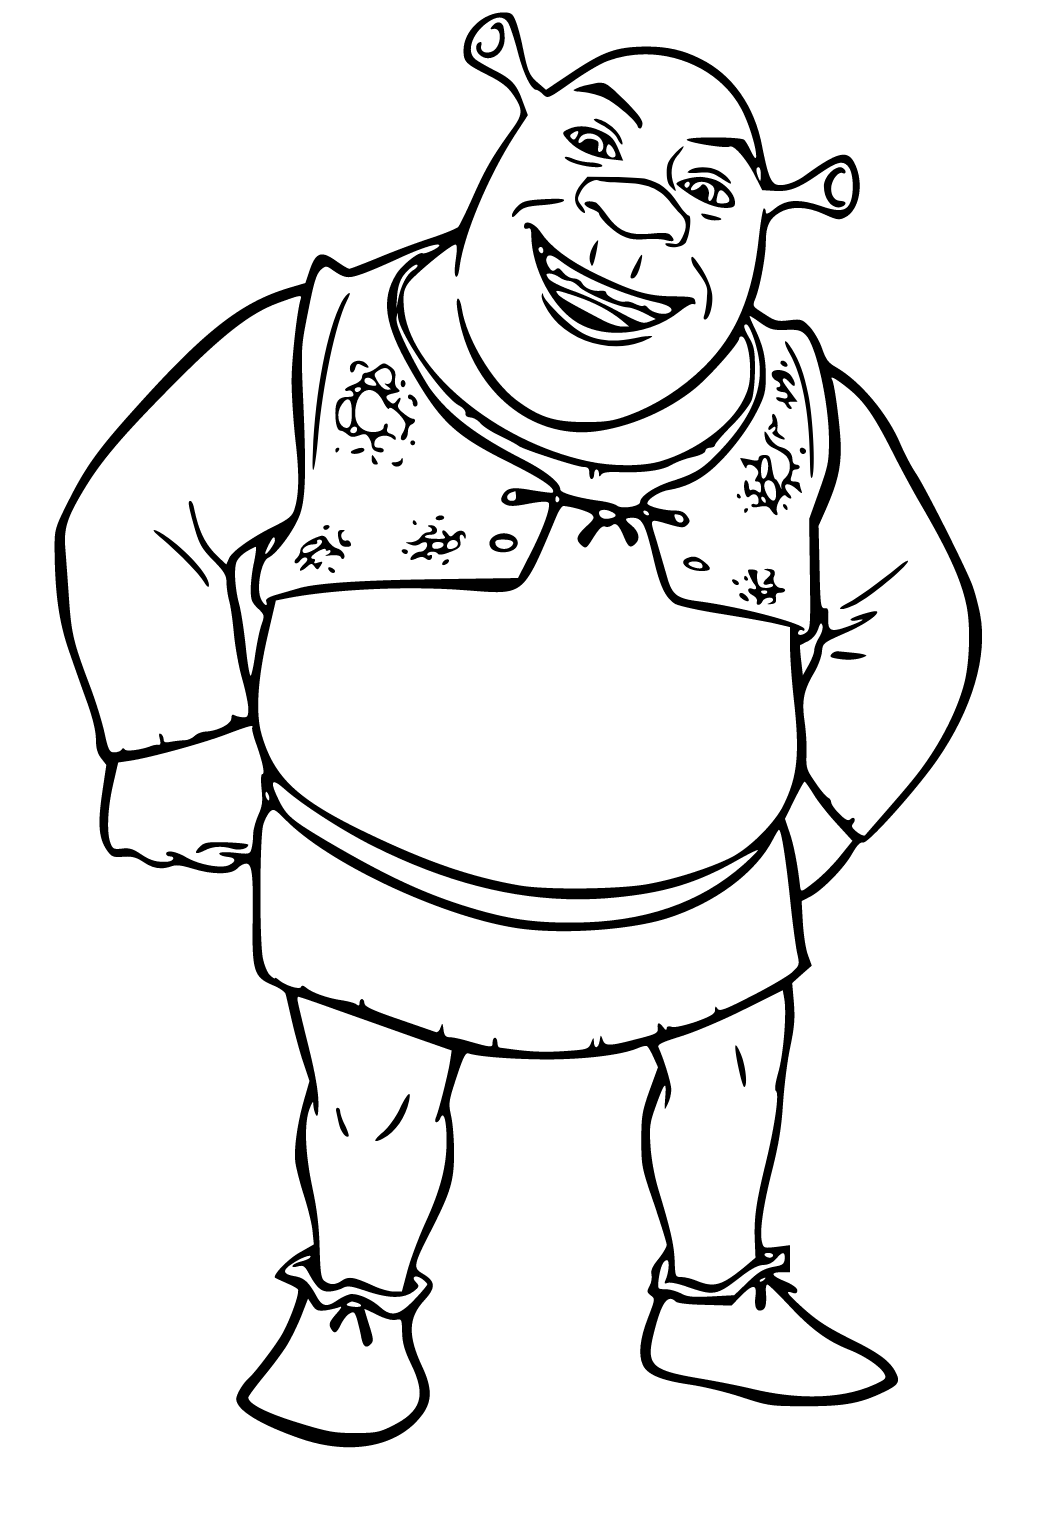 Free printable shrek hero coloring page for adults and kids